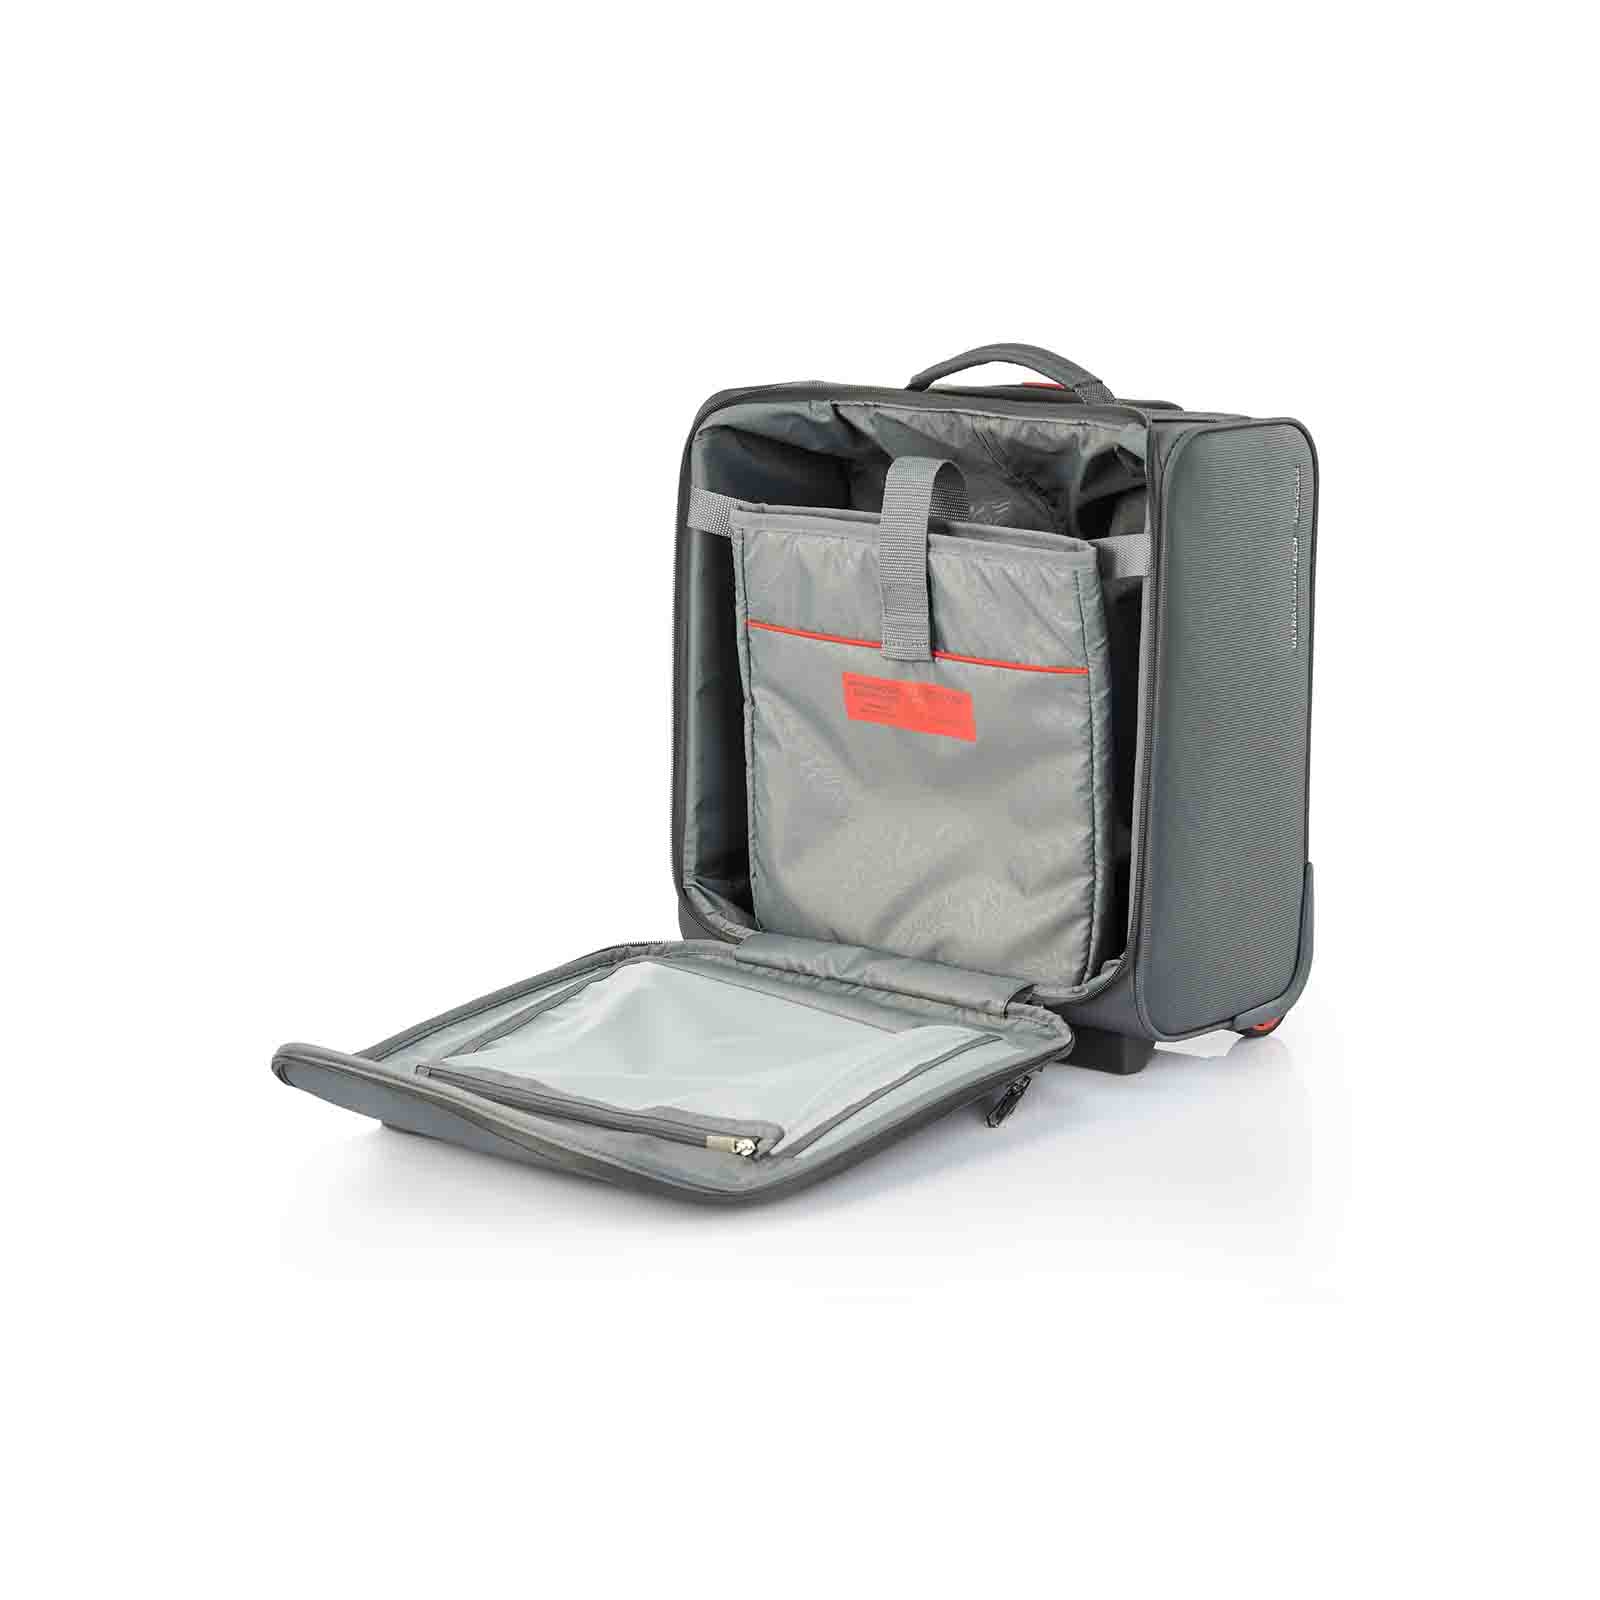 American-Tourister-Applite-4-Eco-Underseater-Suitcase-Grey-Red-Laptop-Pouch